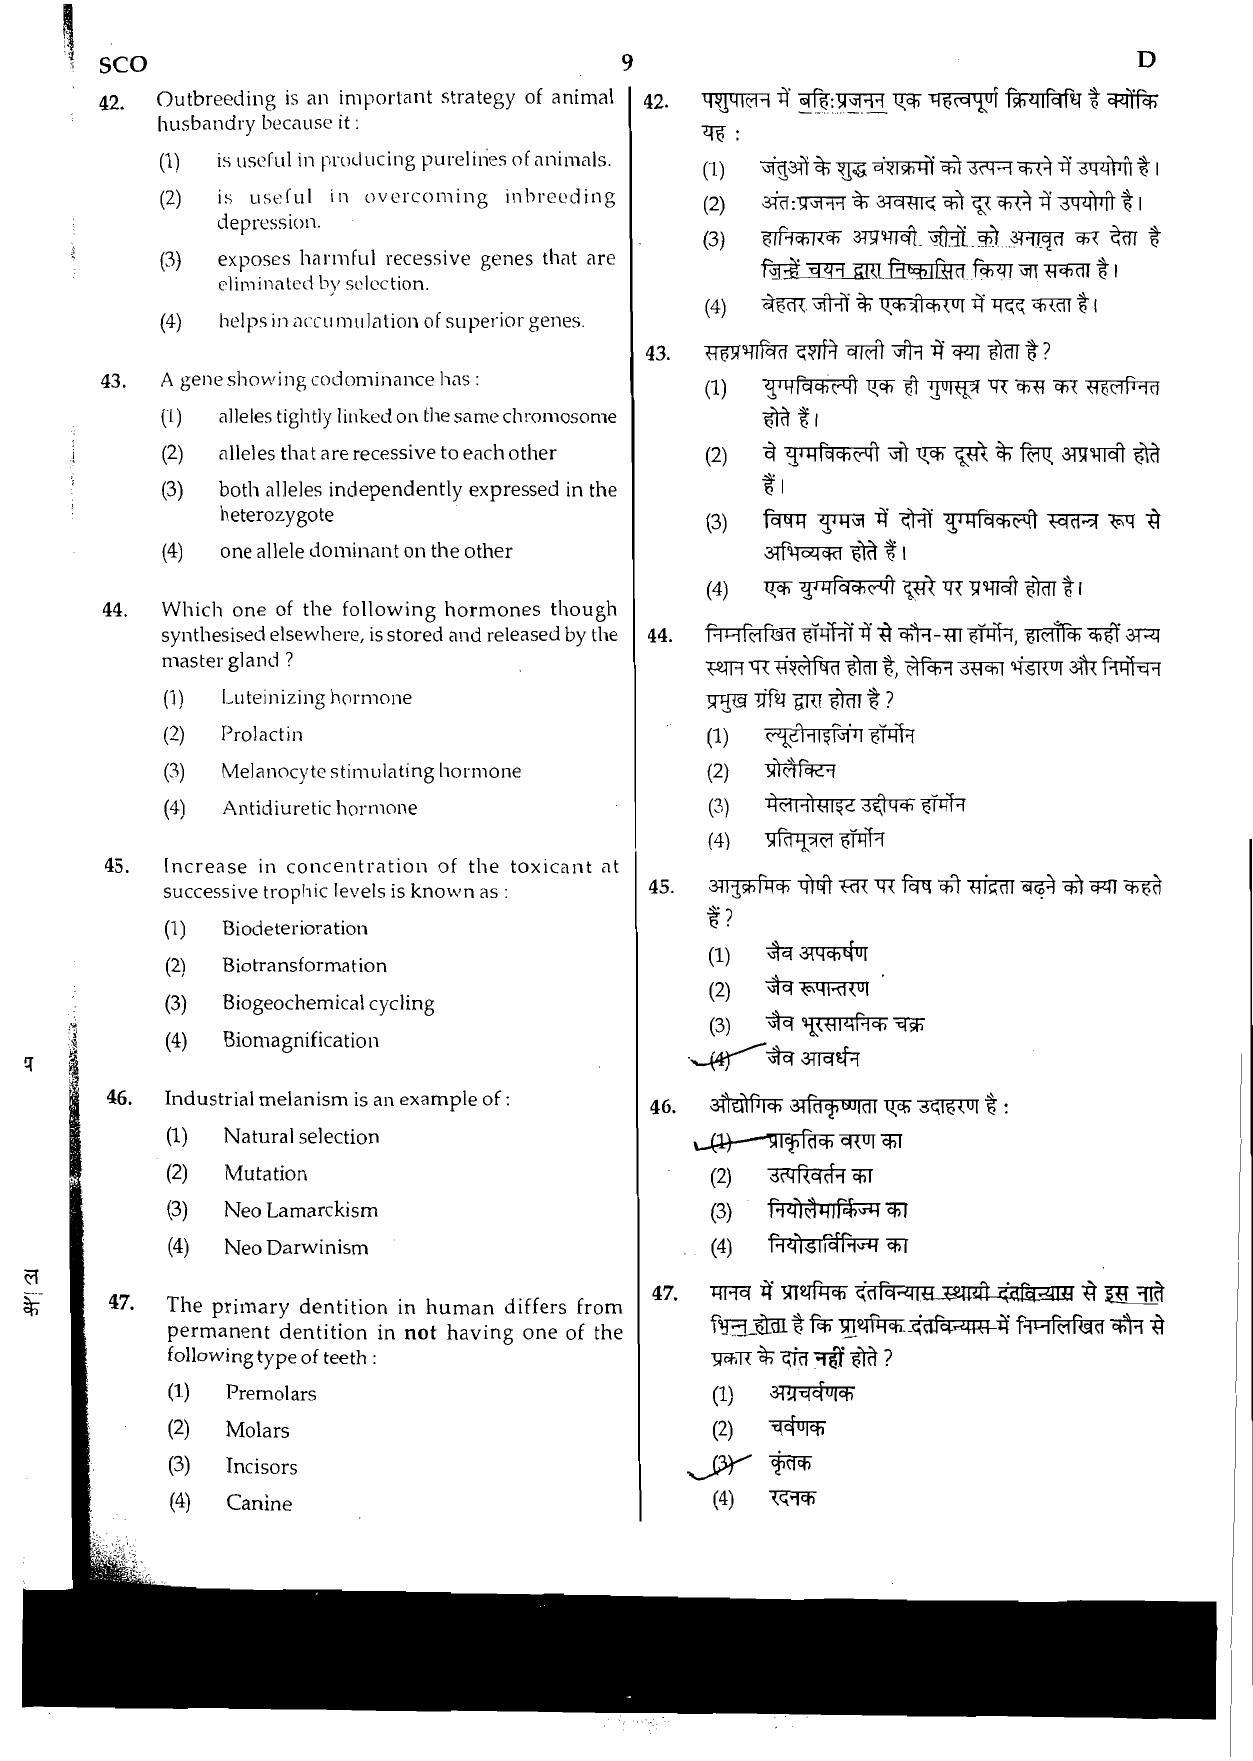 NEET Code D 2015 Question Paper - Page 9